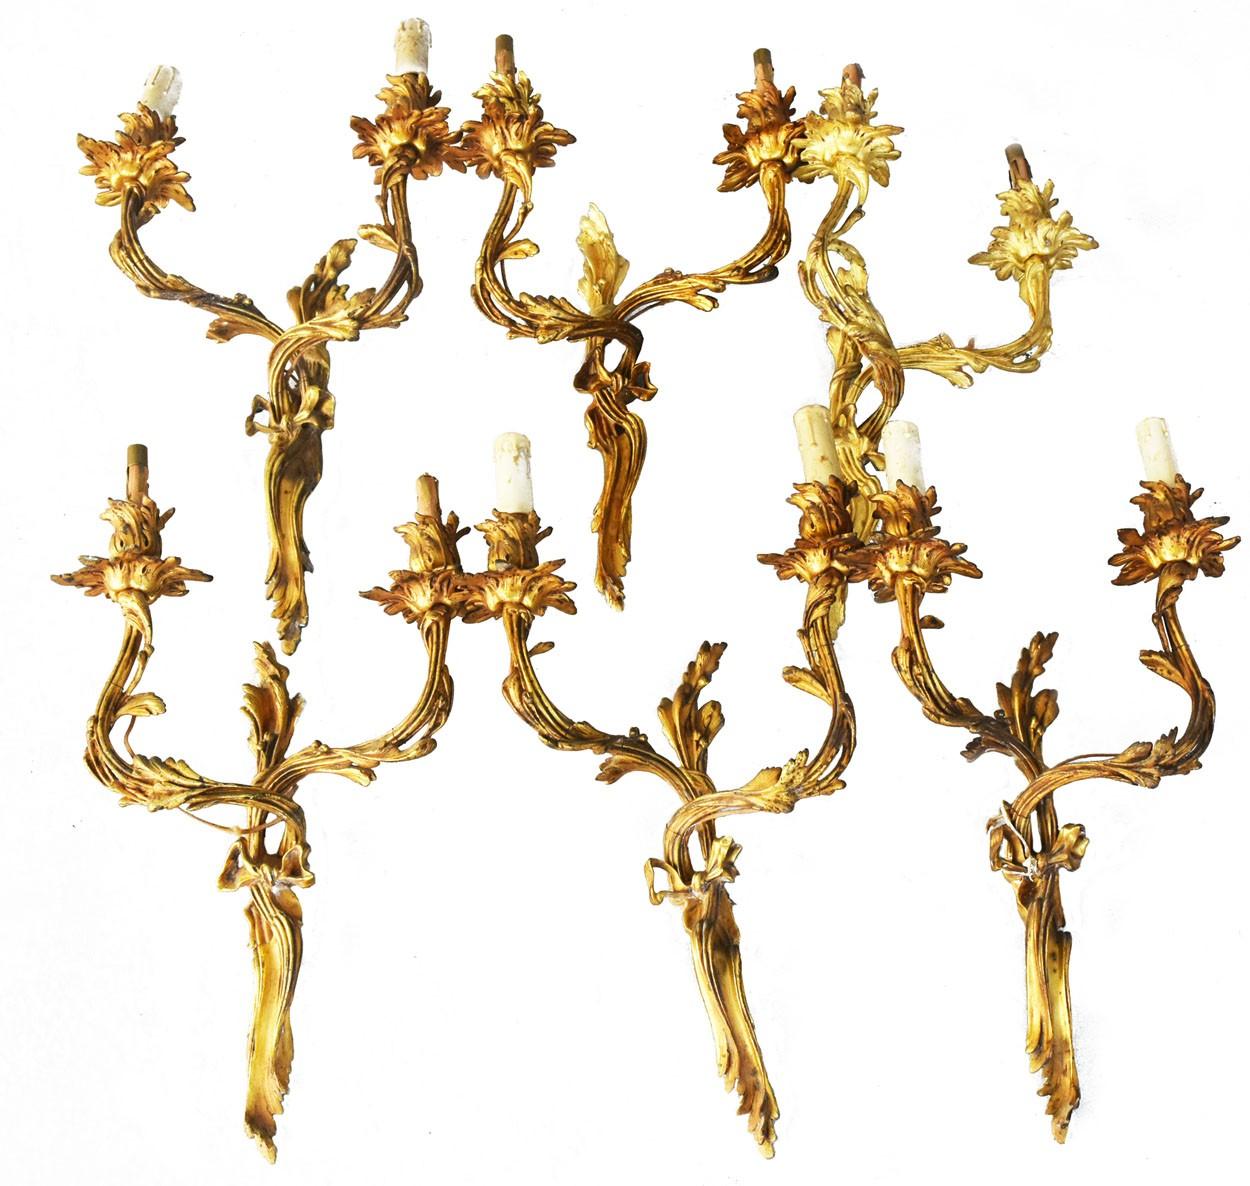 Series of 6 Gilded Bronze Rocaille Napoleon III Period Sconces